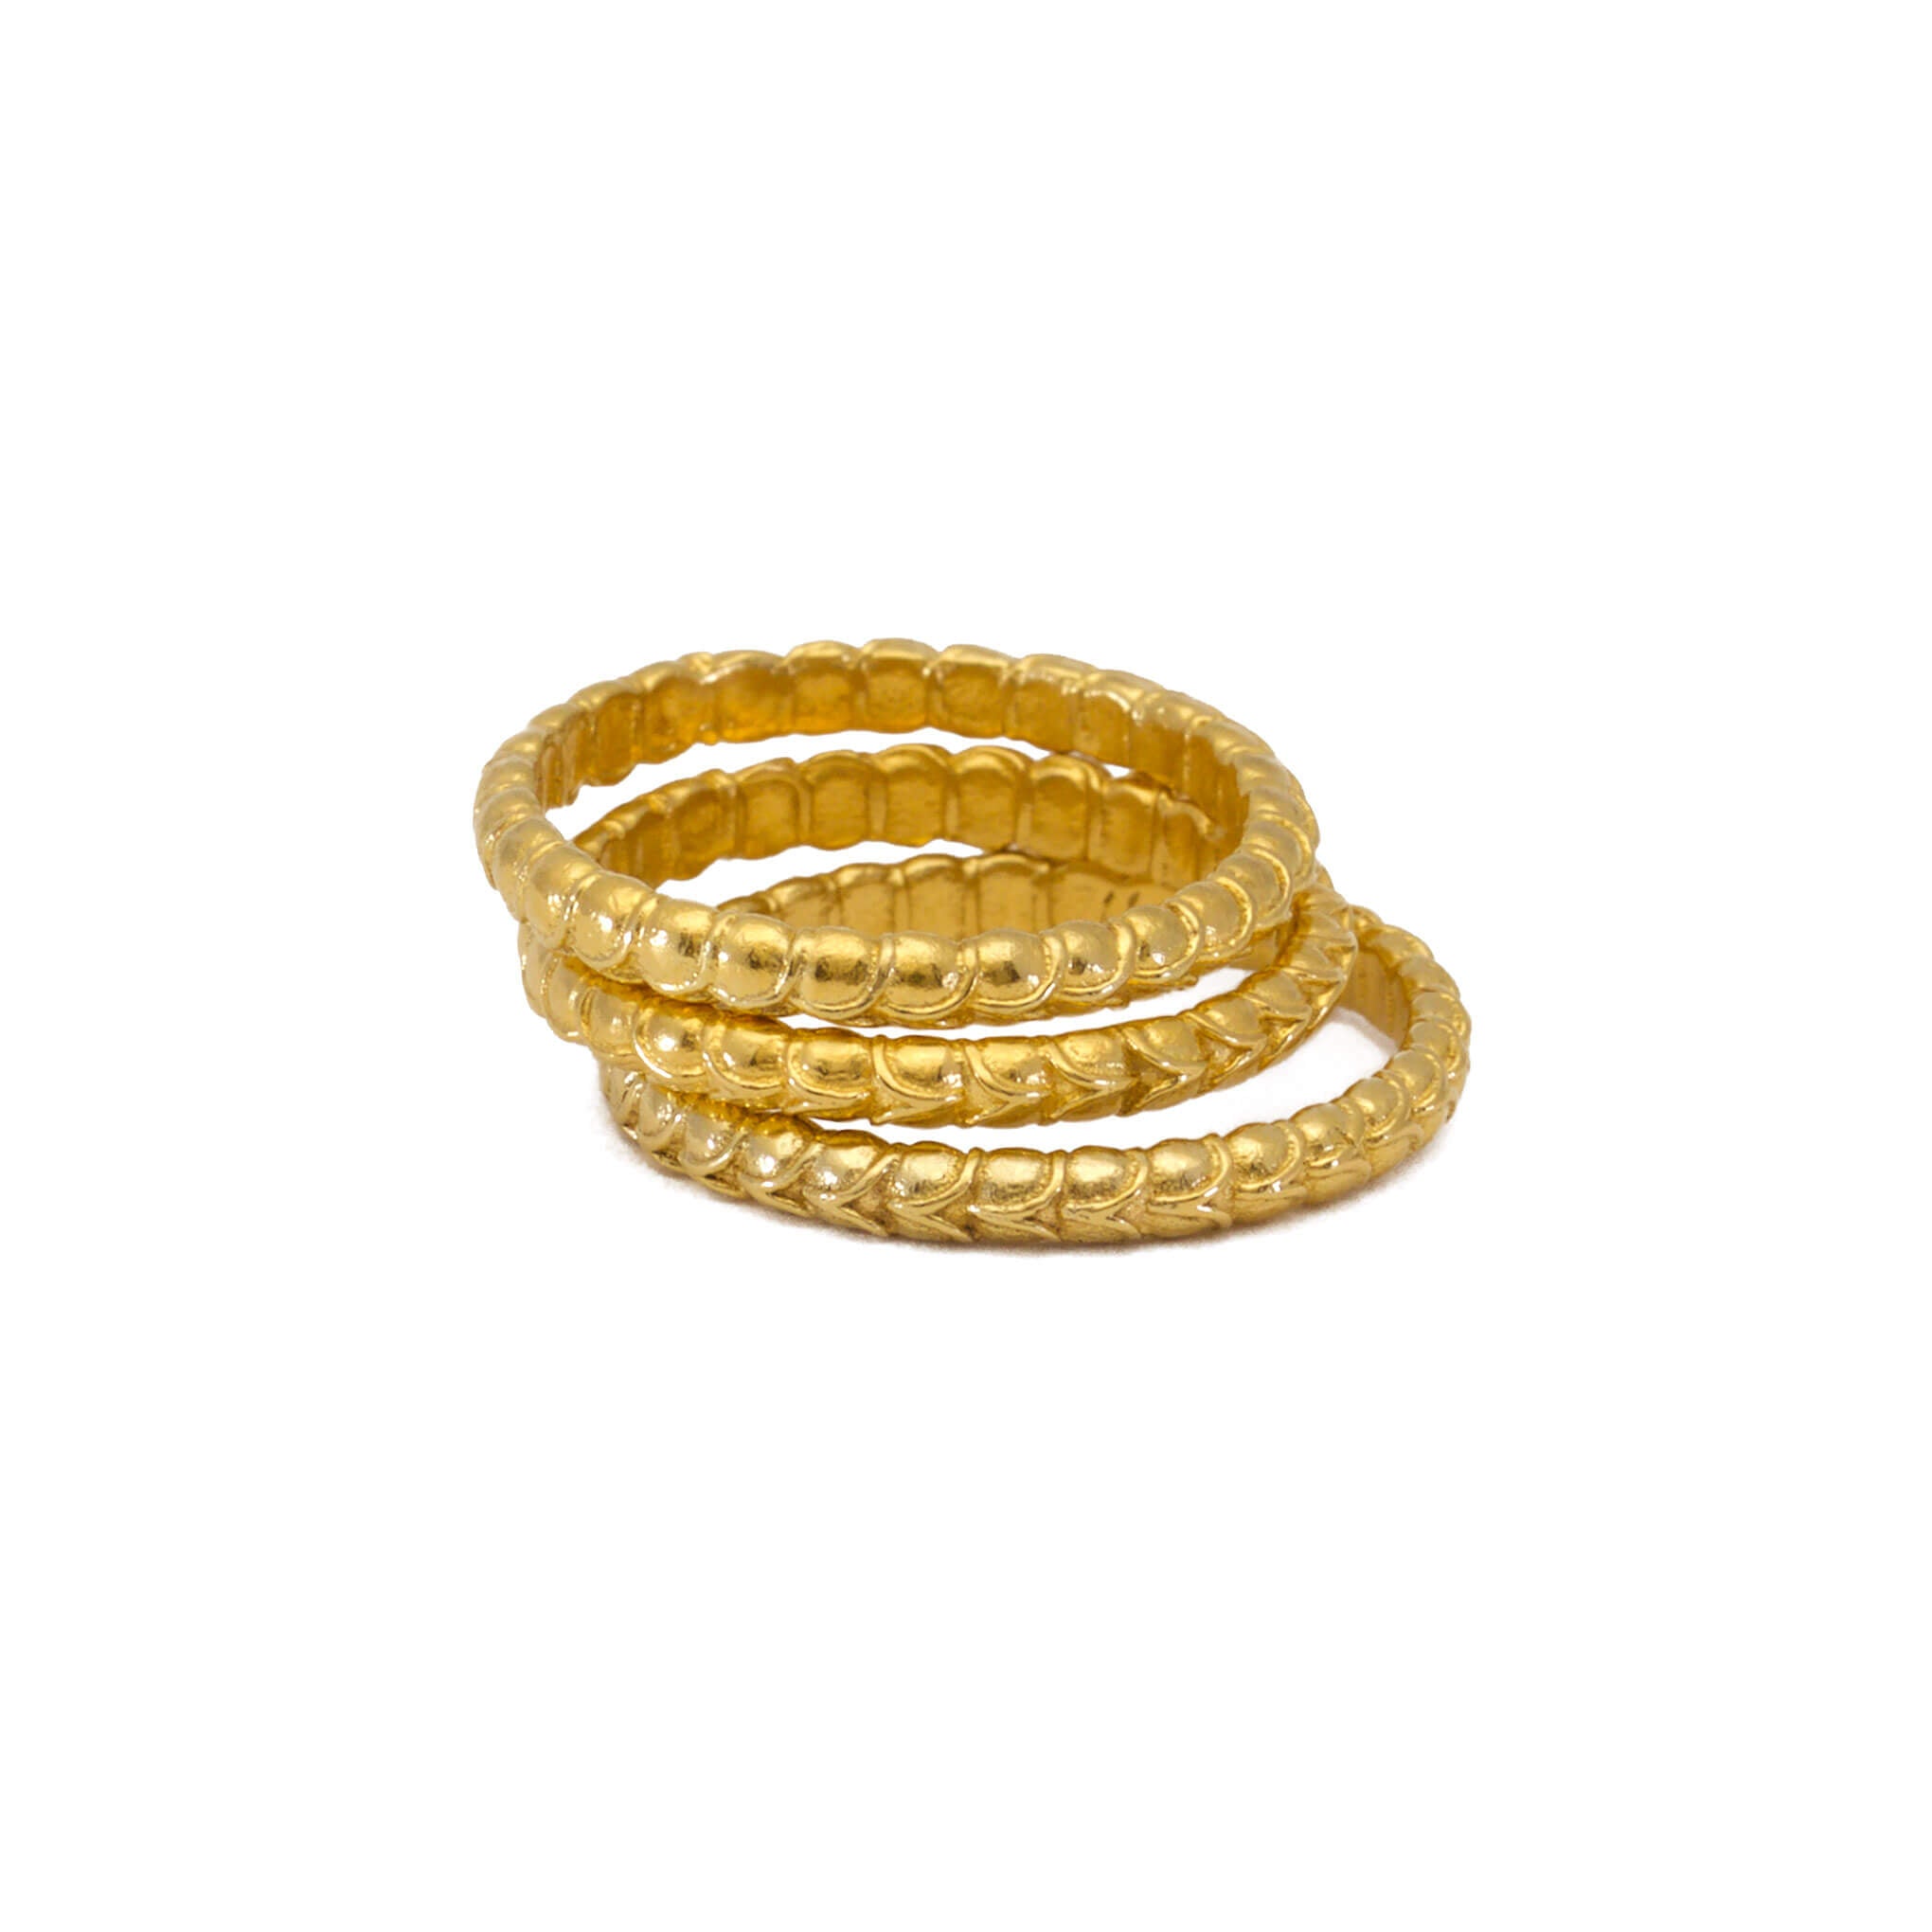 A stack of gold alternative rings